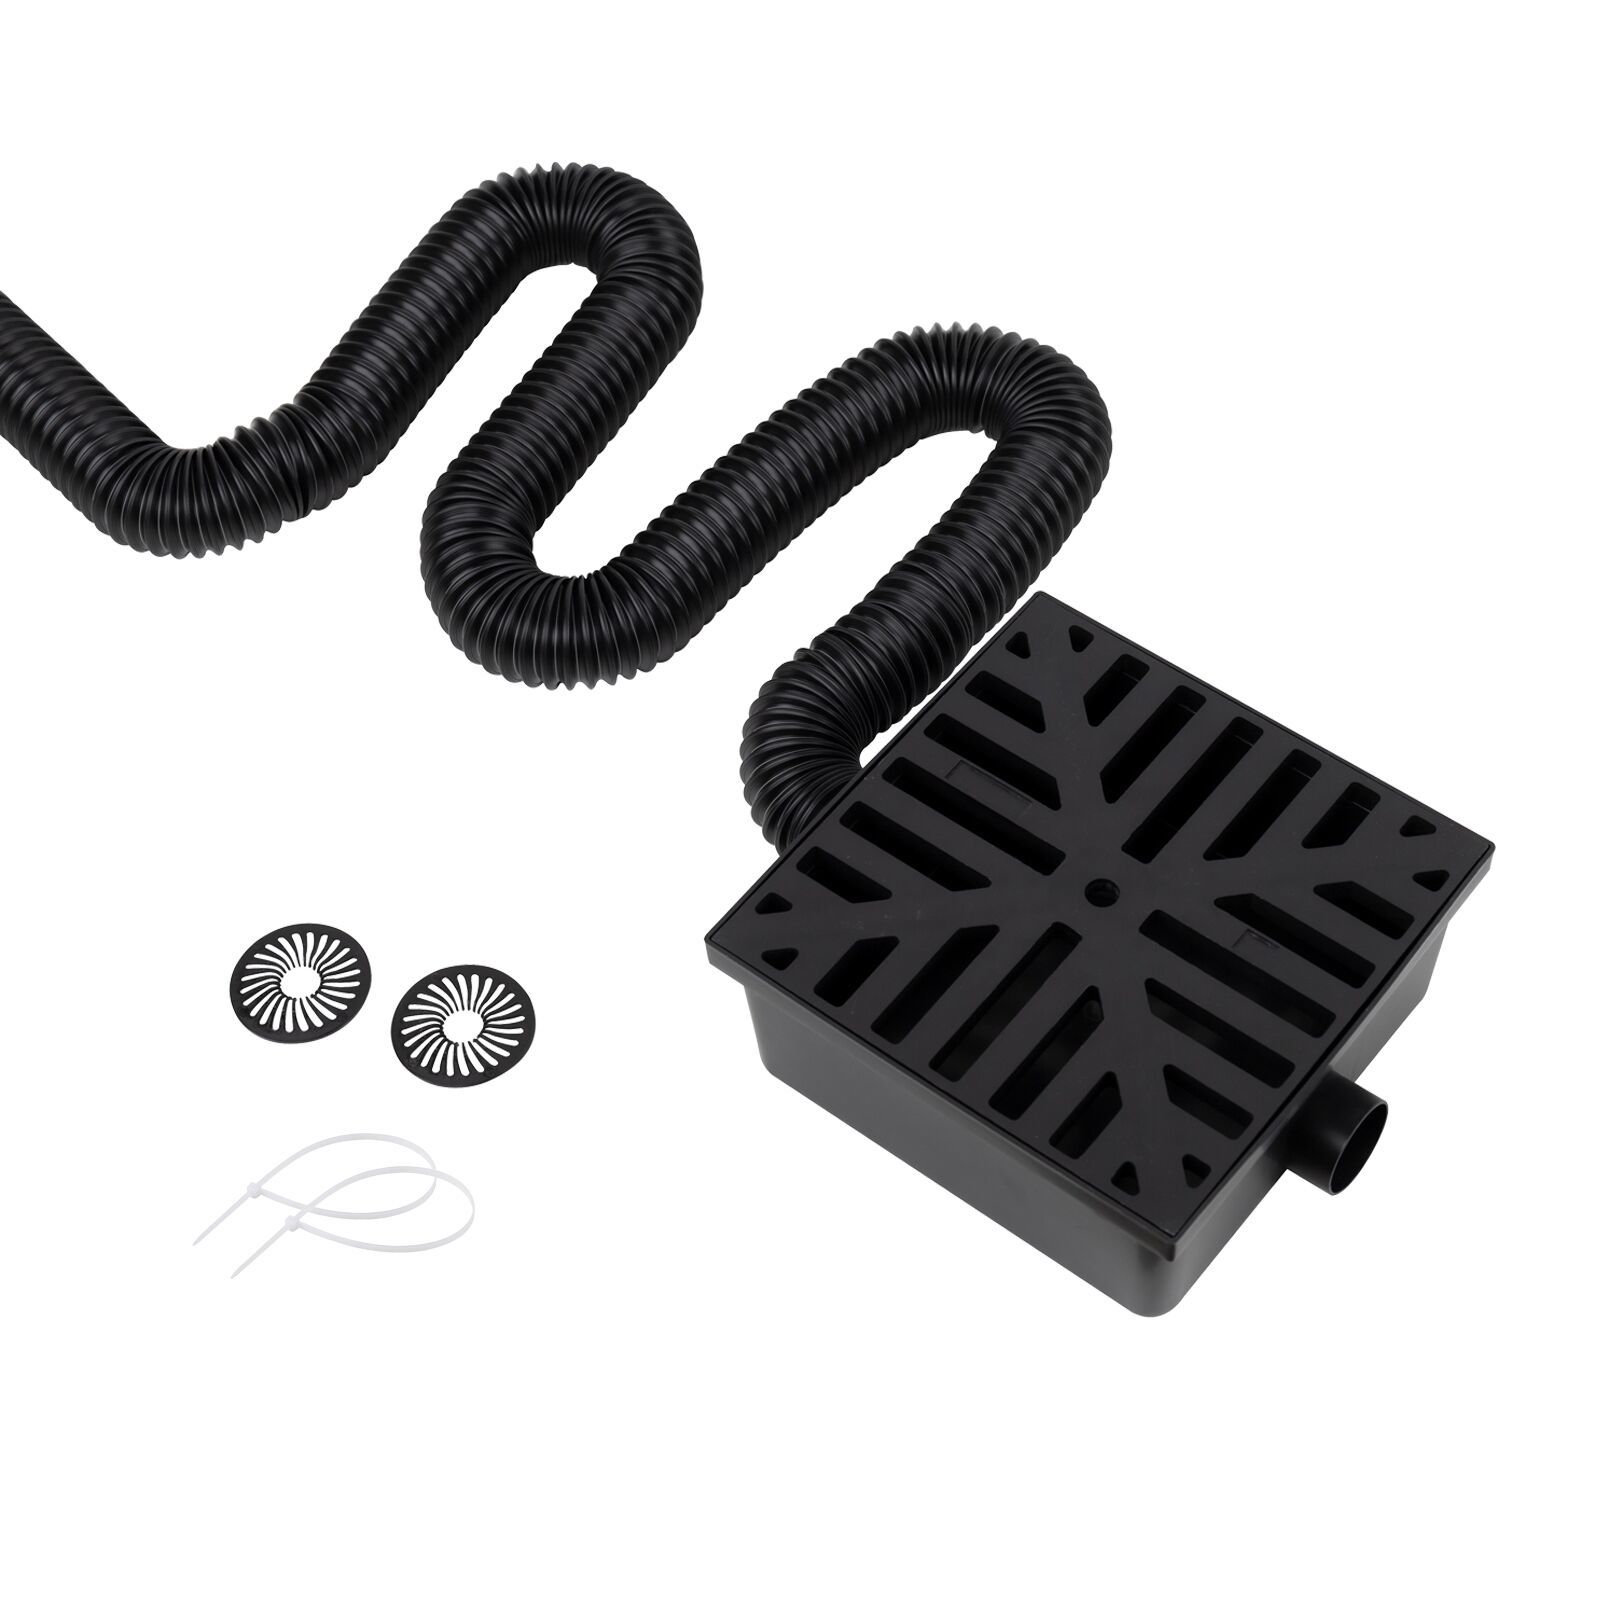 UGCB1010 No Dig Low Profile Catch Basin Downspout Extension Kit